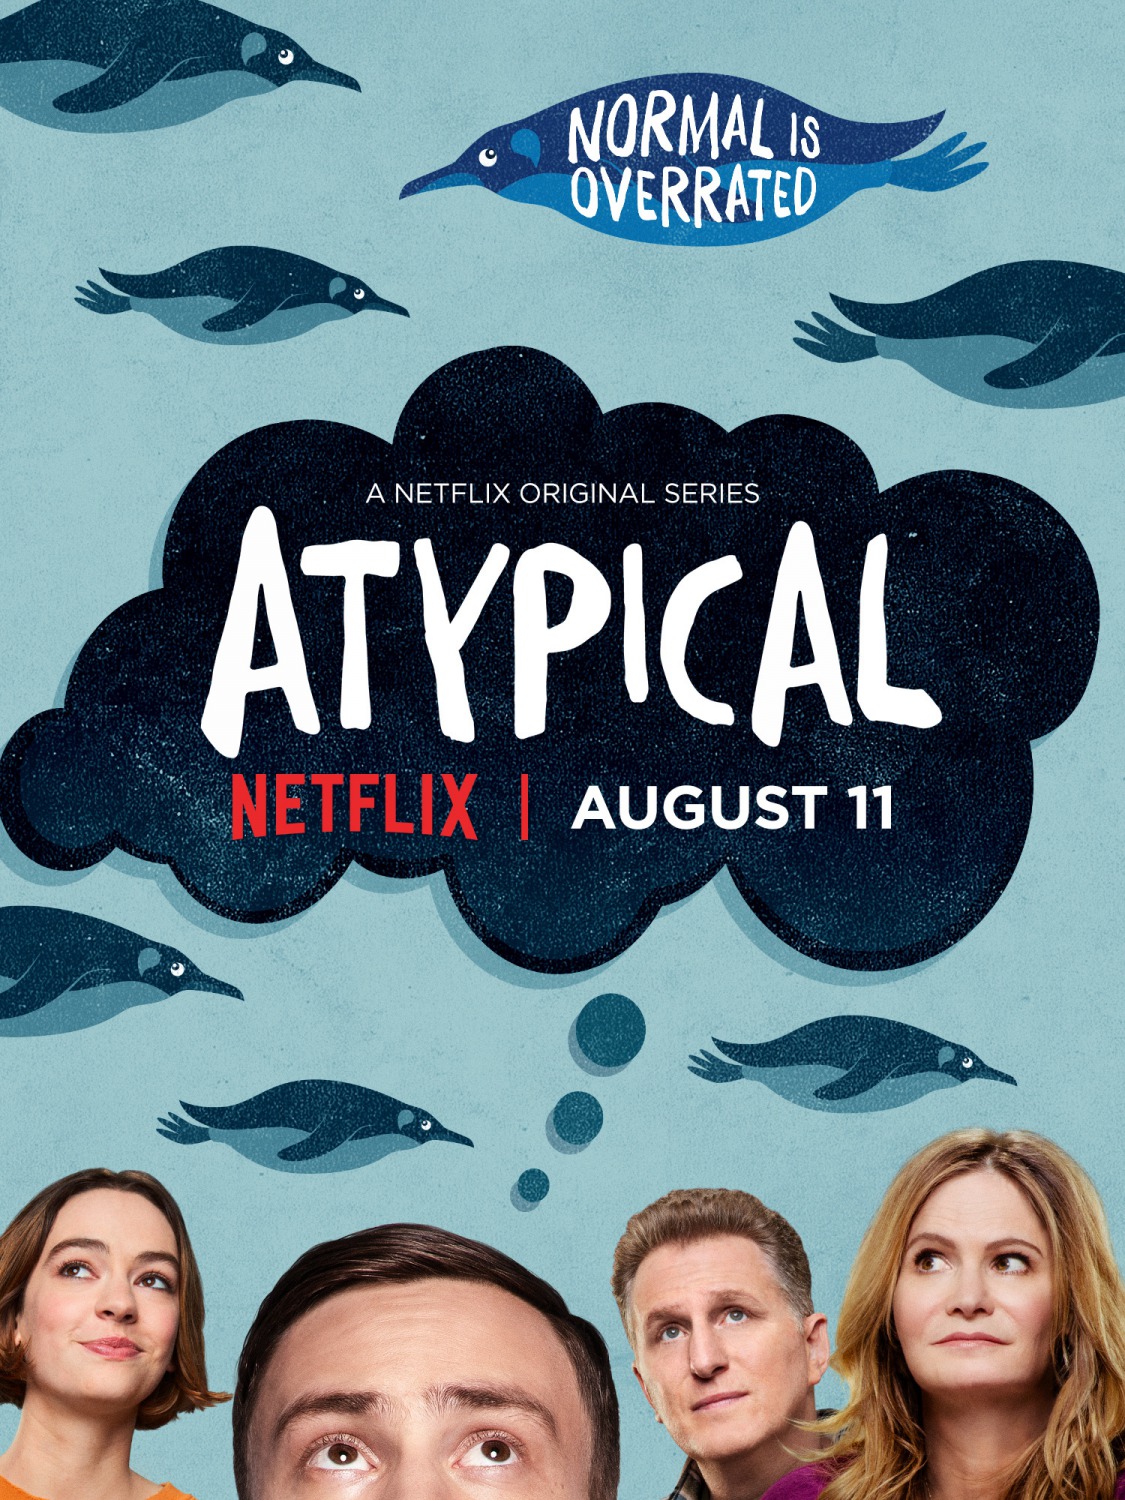 Extra Large TV Poster Image for Atypical (#1 of 3)